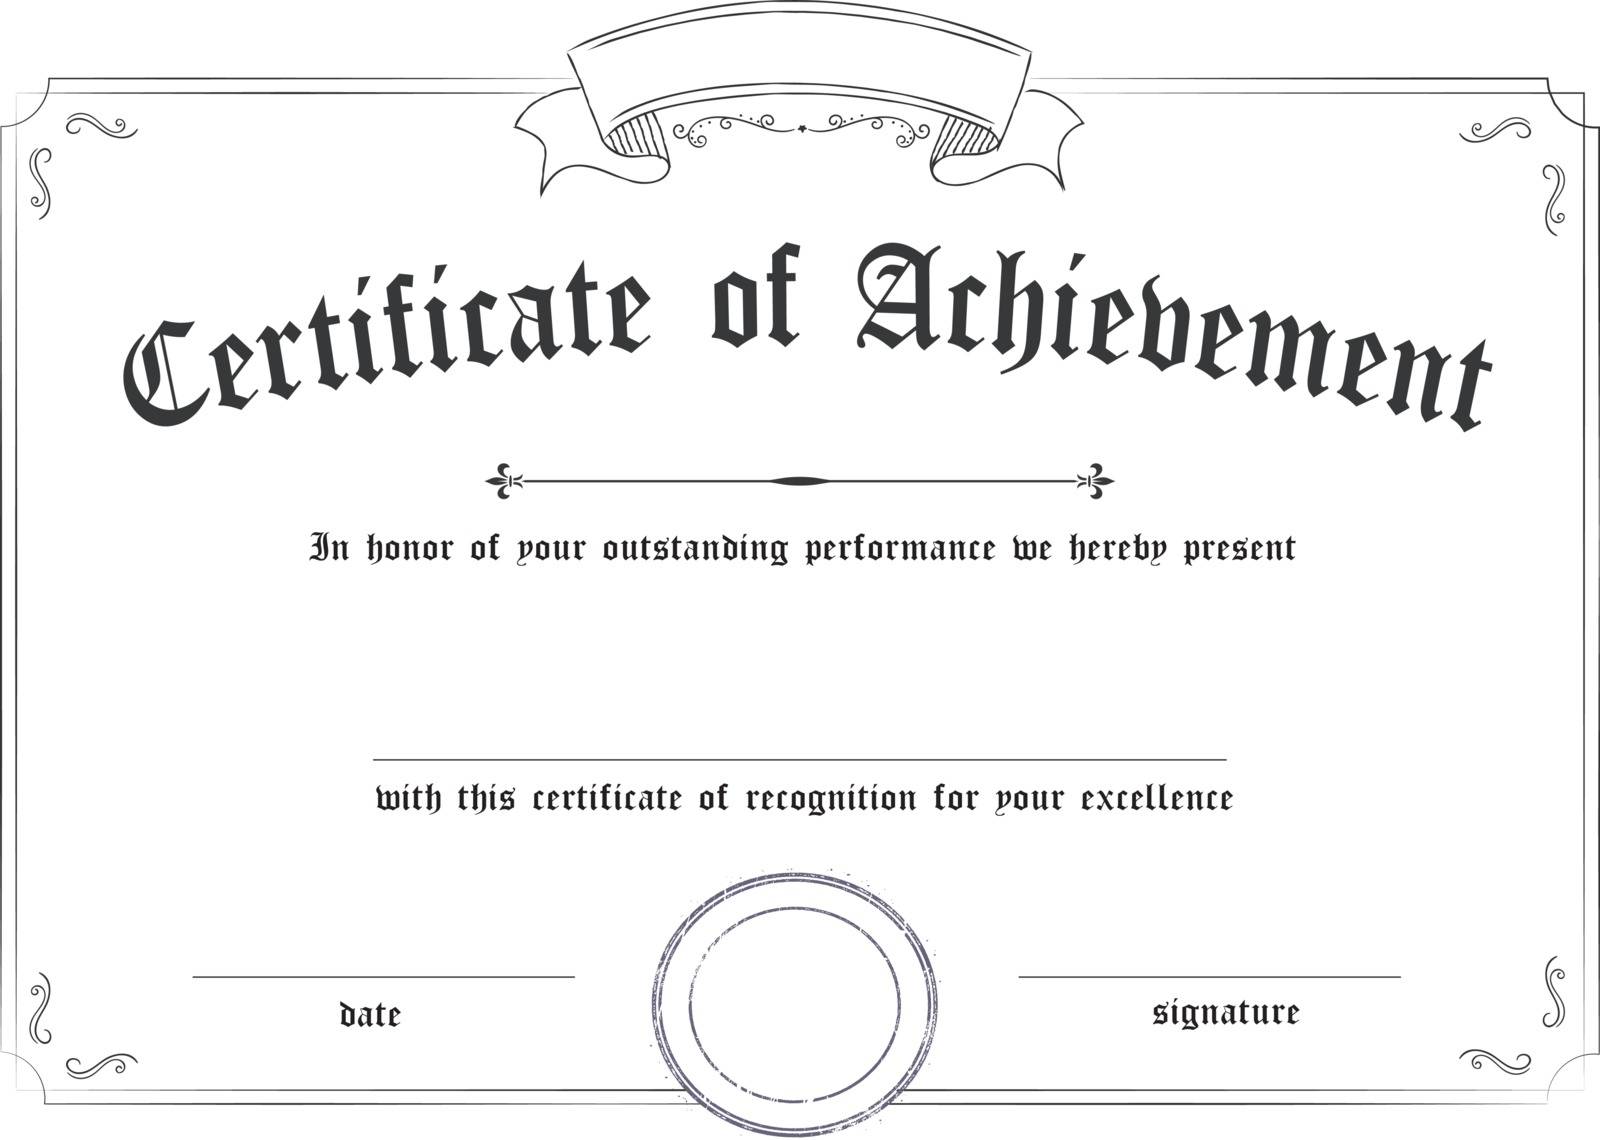  Horizontal classic retro certificate of achievement paper template white background, it’s ready to use